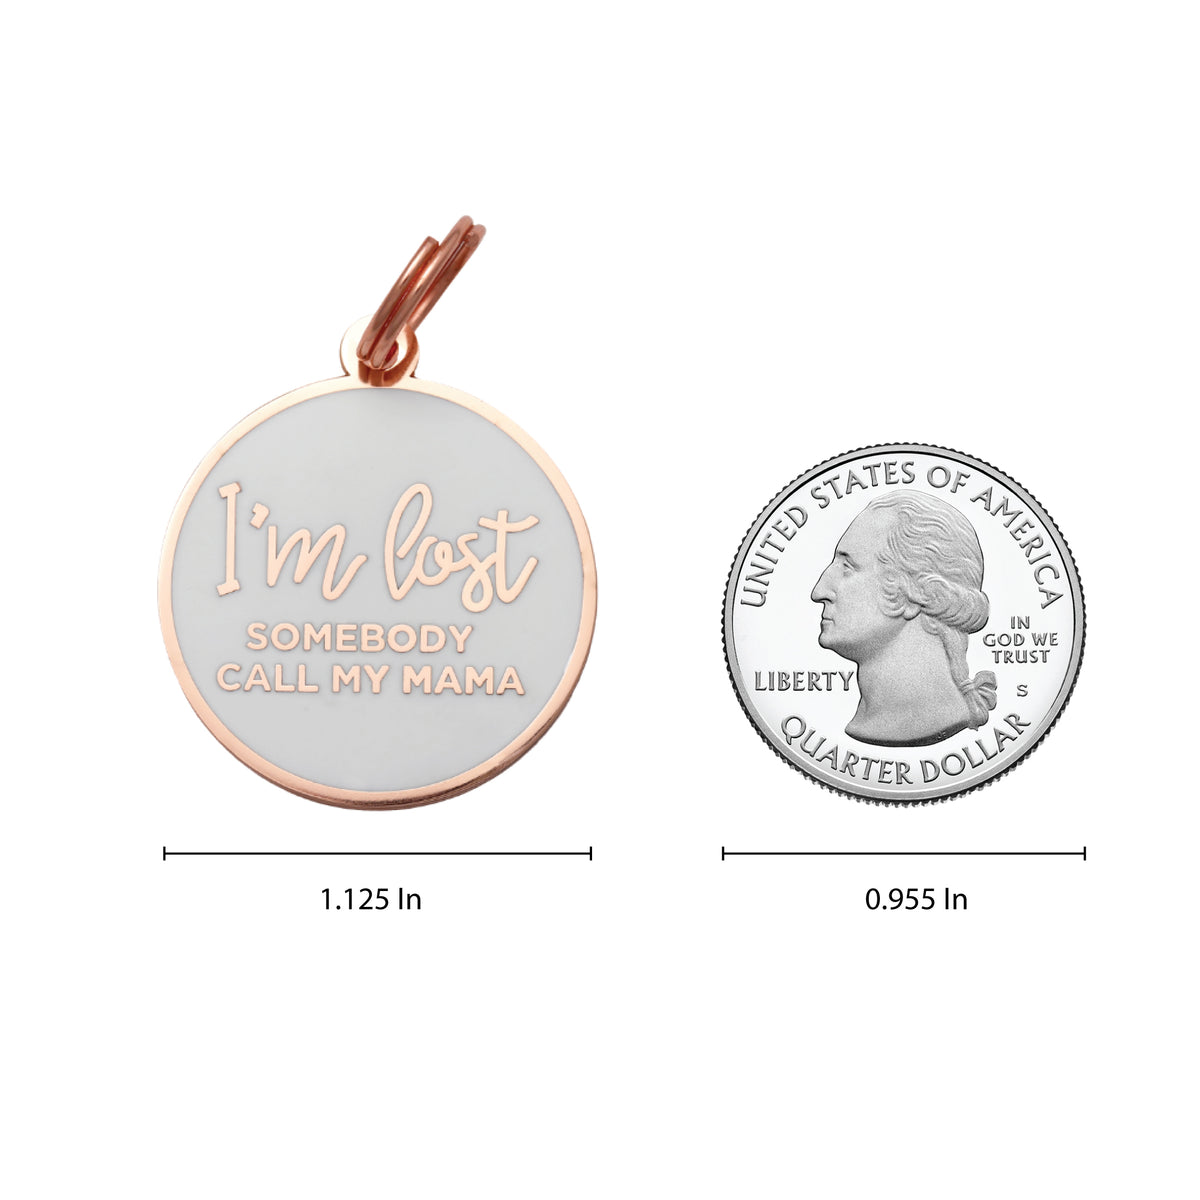 I'm Lost, Gold & White Pet ID Tag - 3 Red Rovers